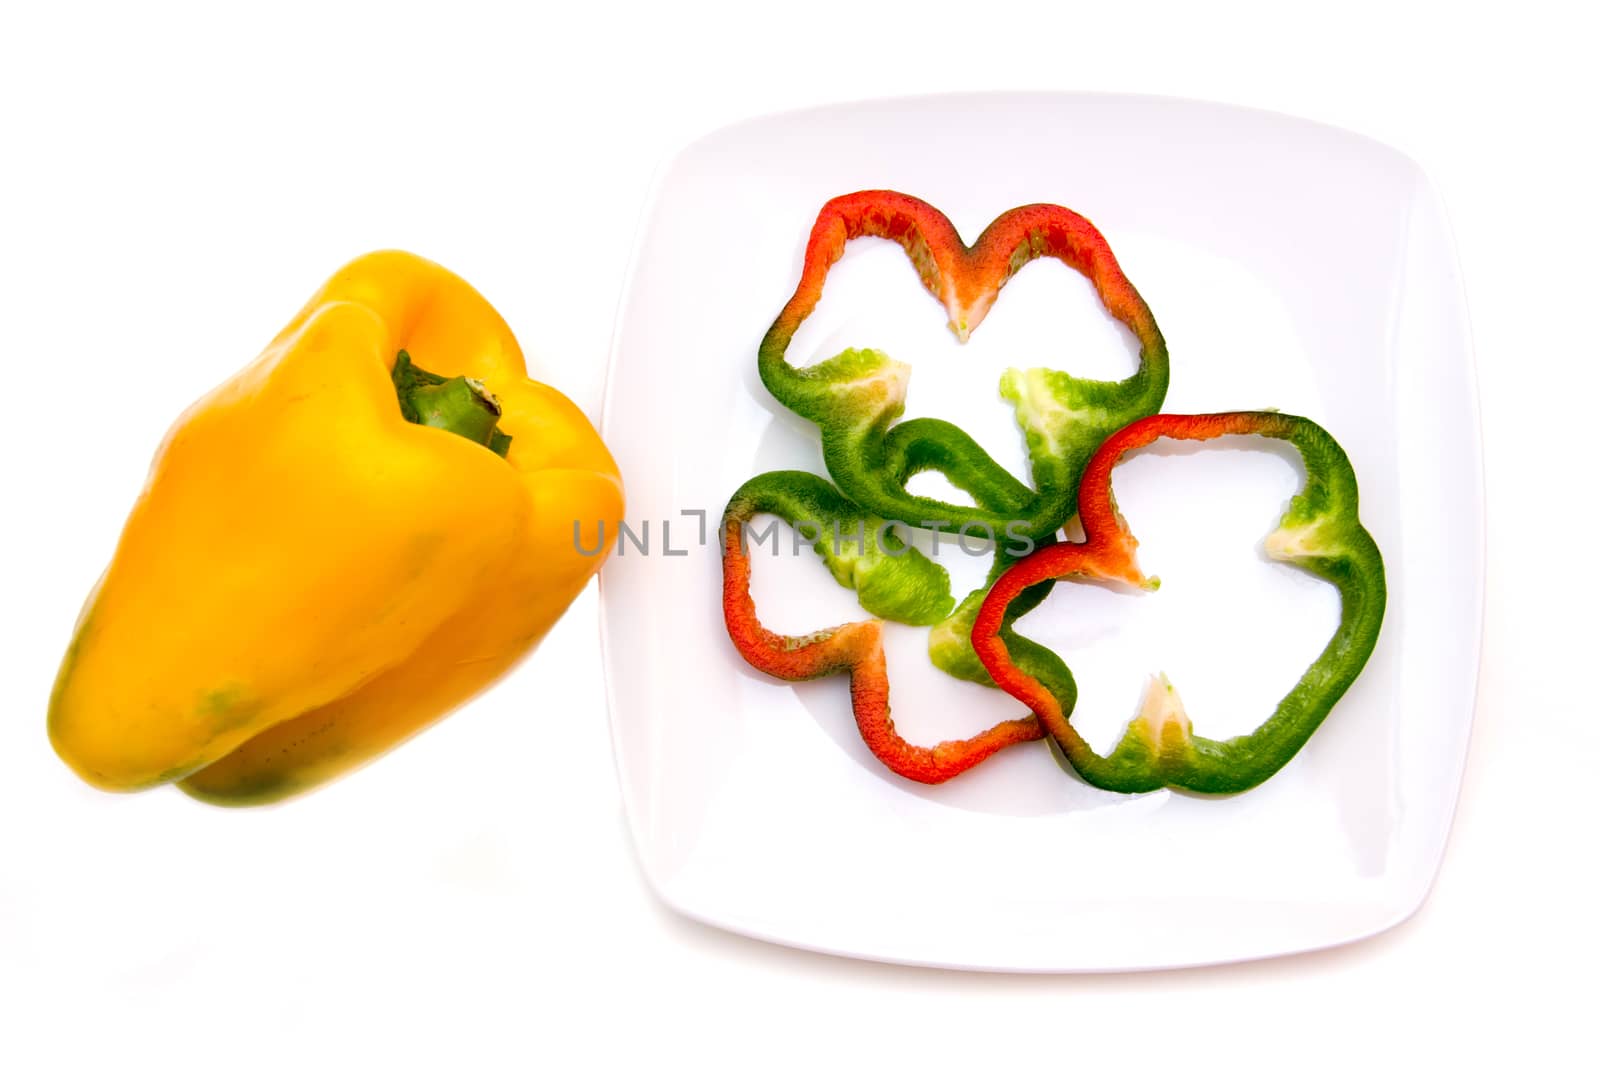 Pepper slices on plate on white background viewed from above